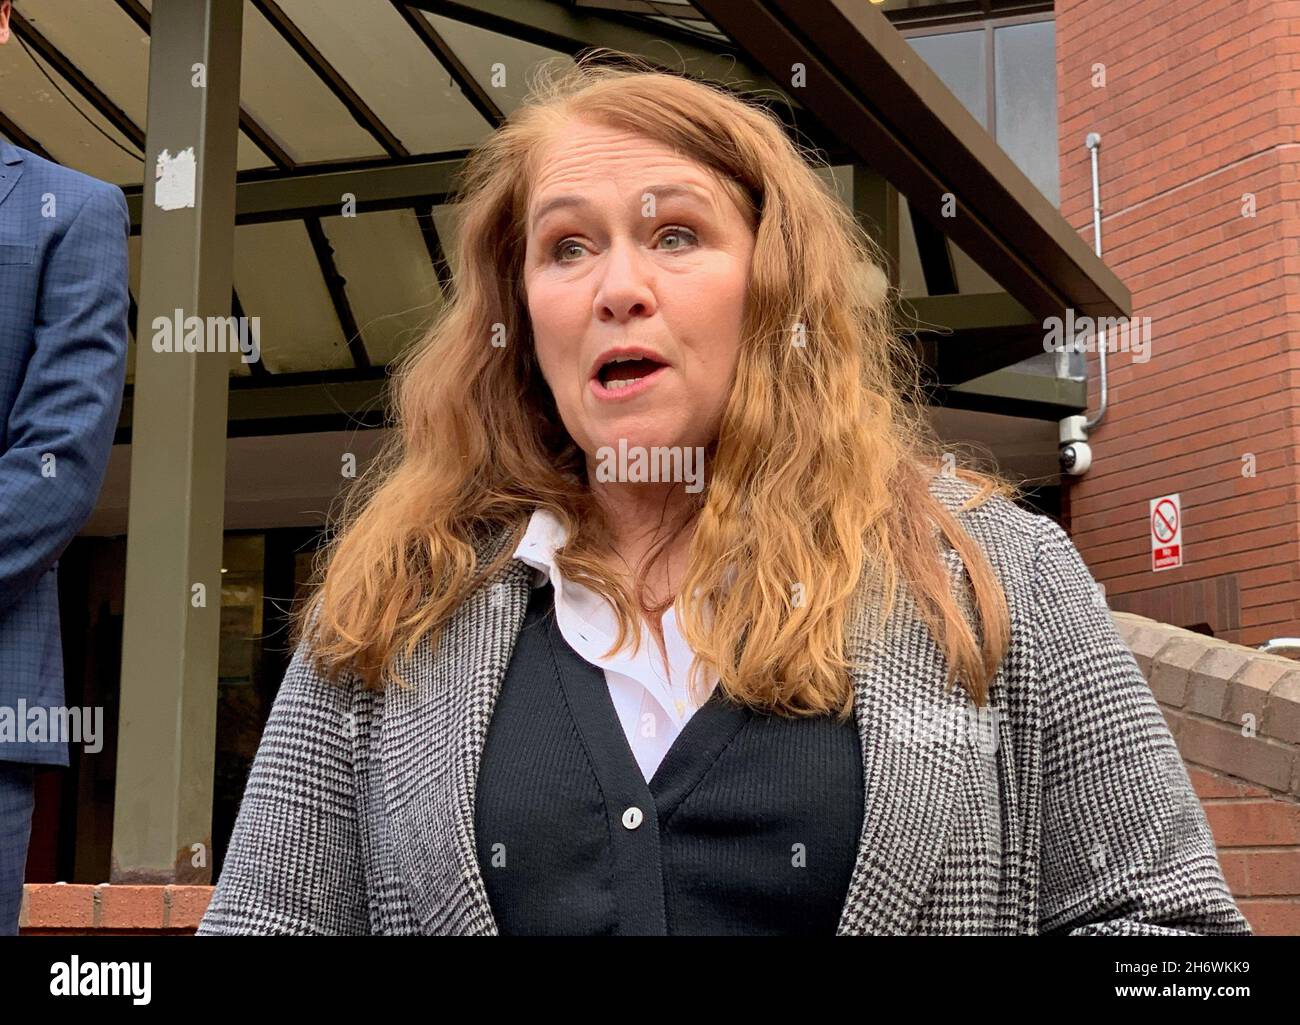 Jacob Billington's mother Joanne Billington speaking outside Birmingham Crown Court after the sentencing of Zephaniah McLeod. The 28-year-old, who was diagnosed with paranoid schizophrenia in 2012, previously admitted the manslaughter of Jacob, after stabbing the 23-year-old to death in the early hours of September 6, 2020. Picture date: Thursday November 18, 2021. Stock Photo